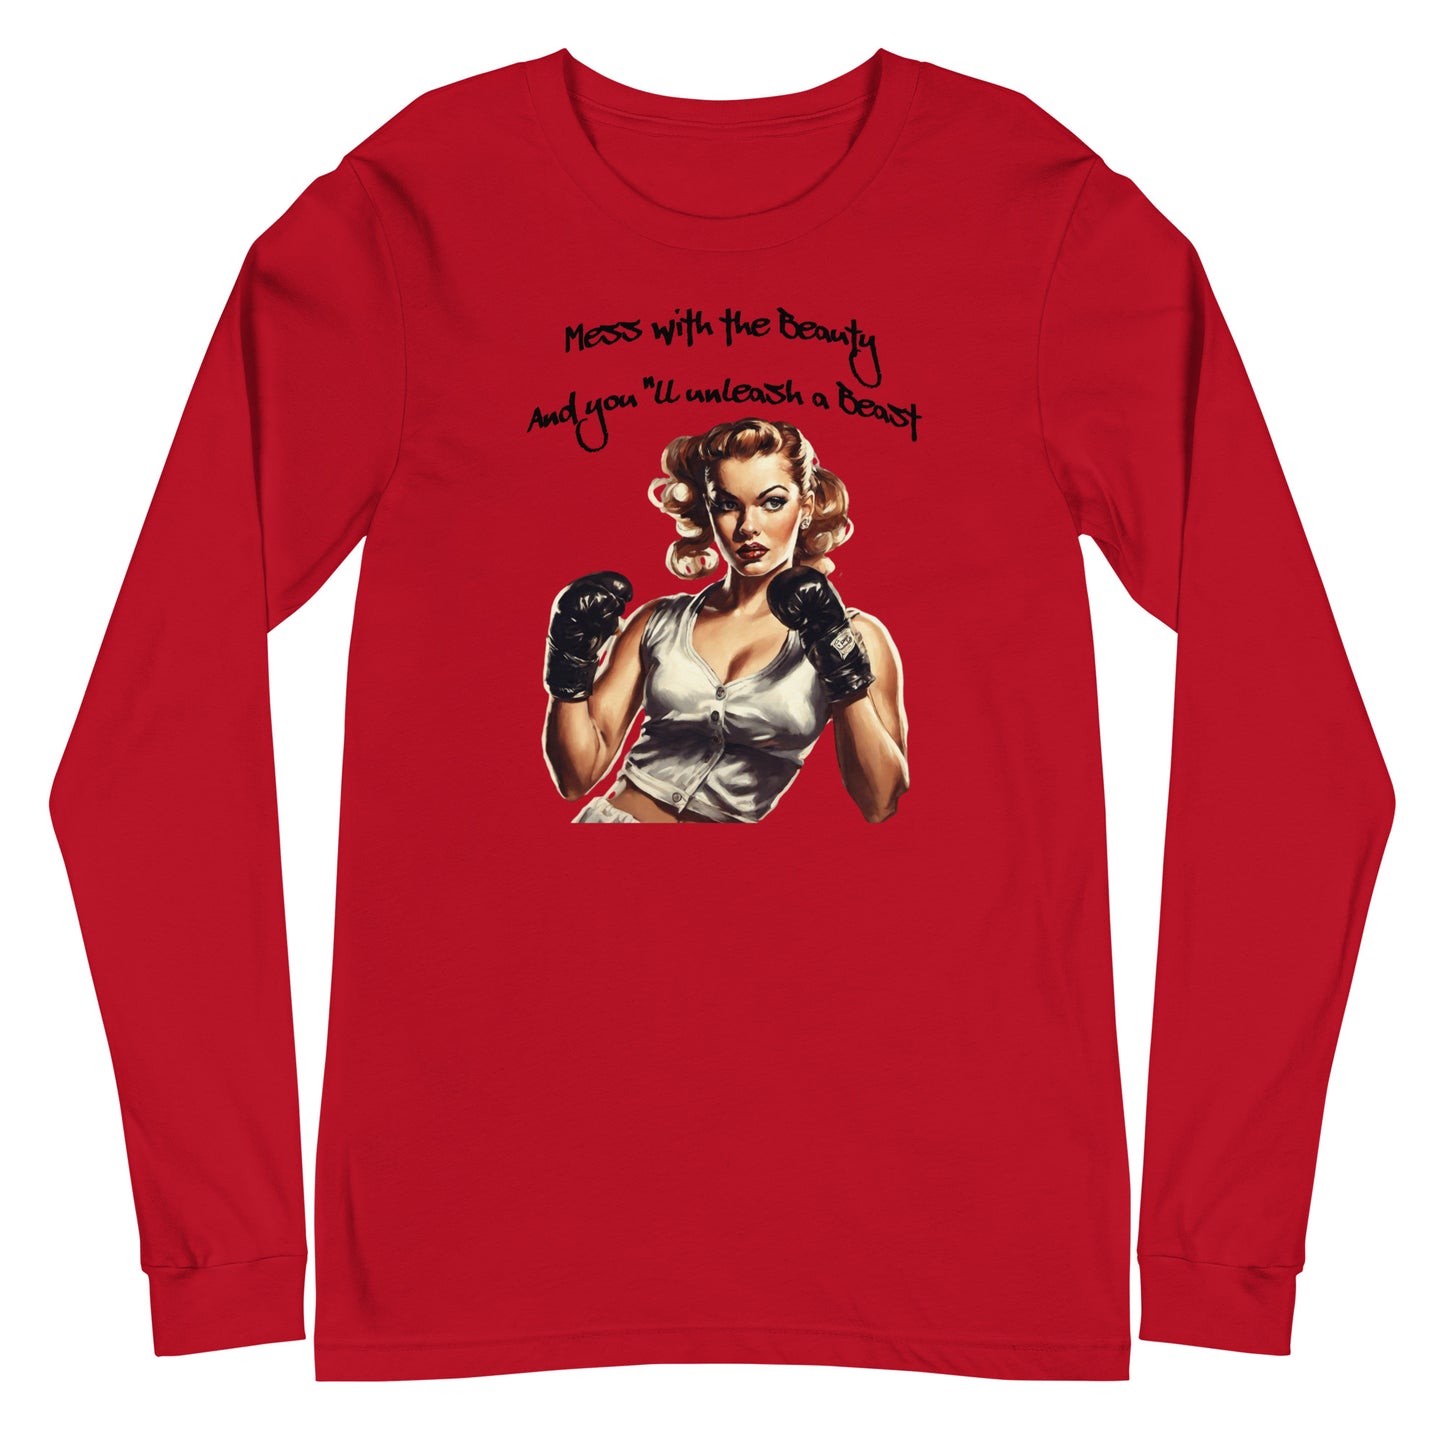 Mess with the Beauty, Unleash the Beast Women's Long Sleeve Tee Red